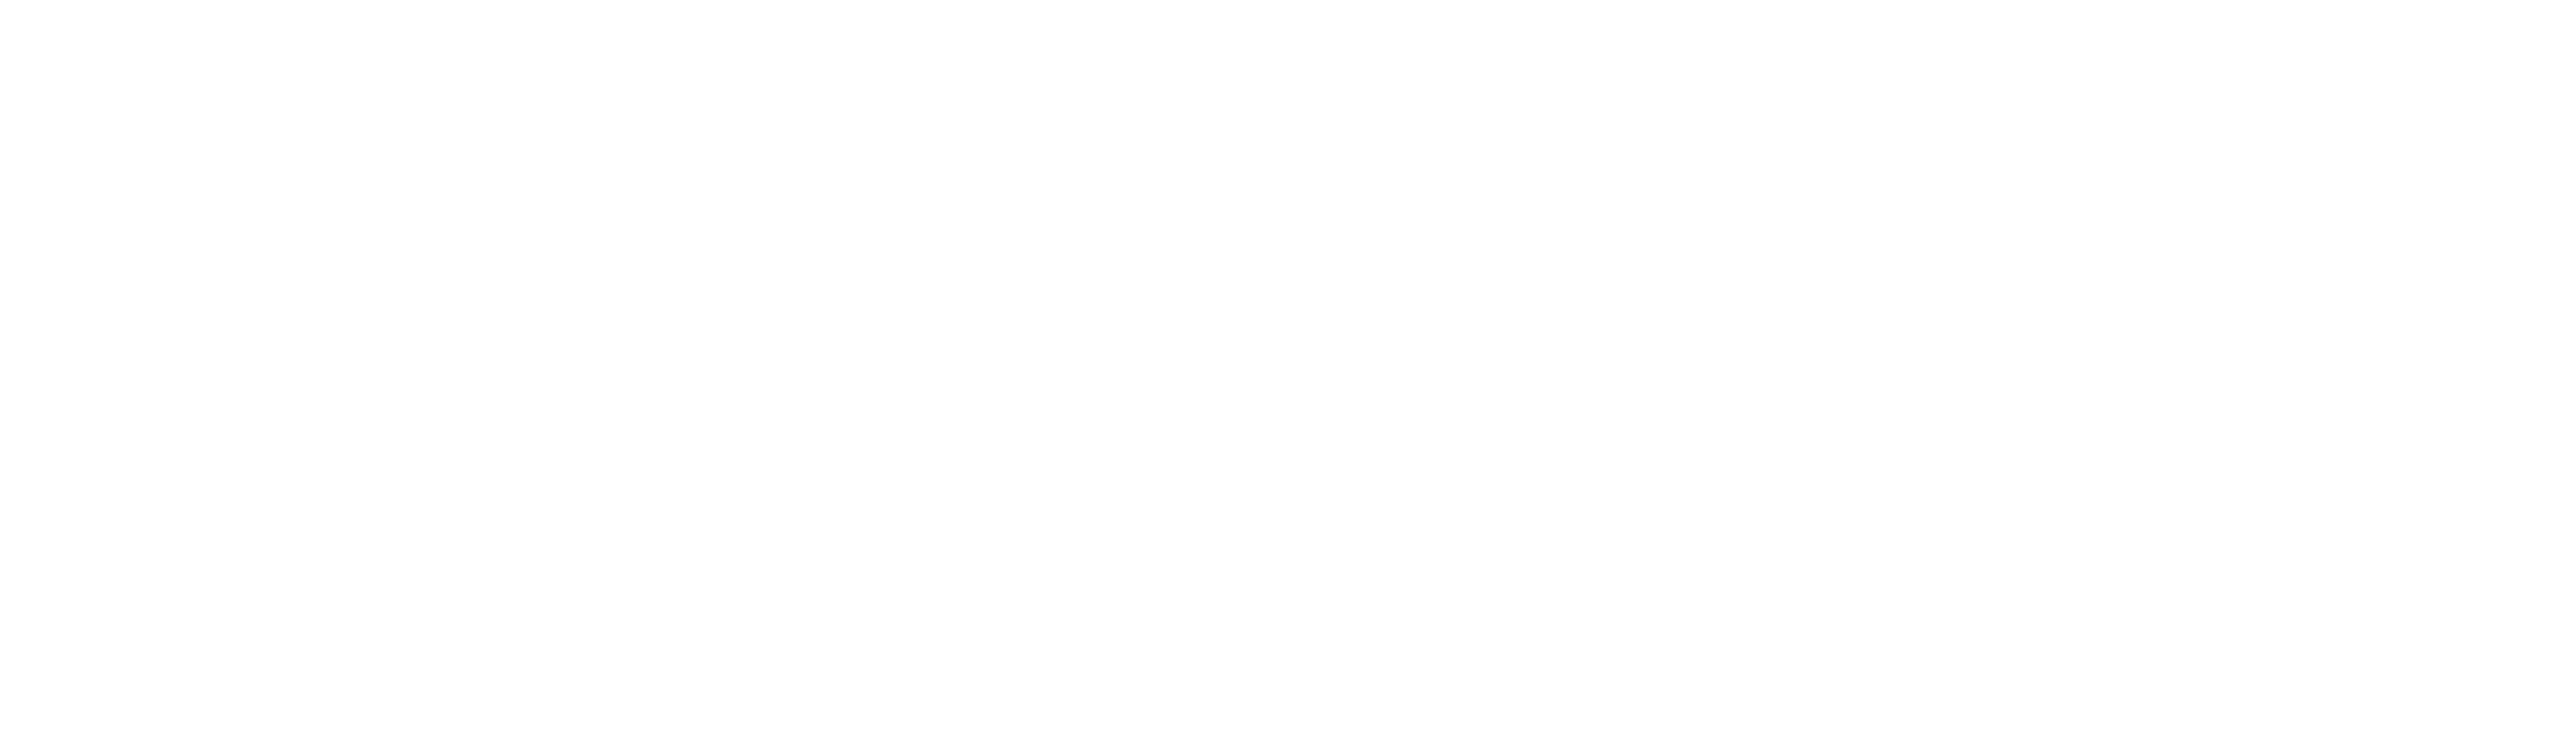 Select arrows or scroll to learn about: Human Centered Design and Development